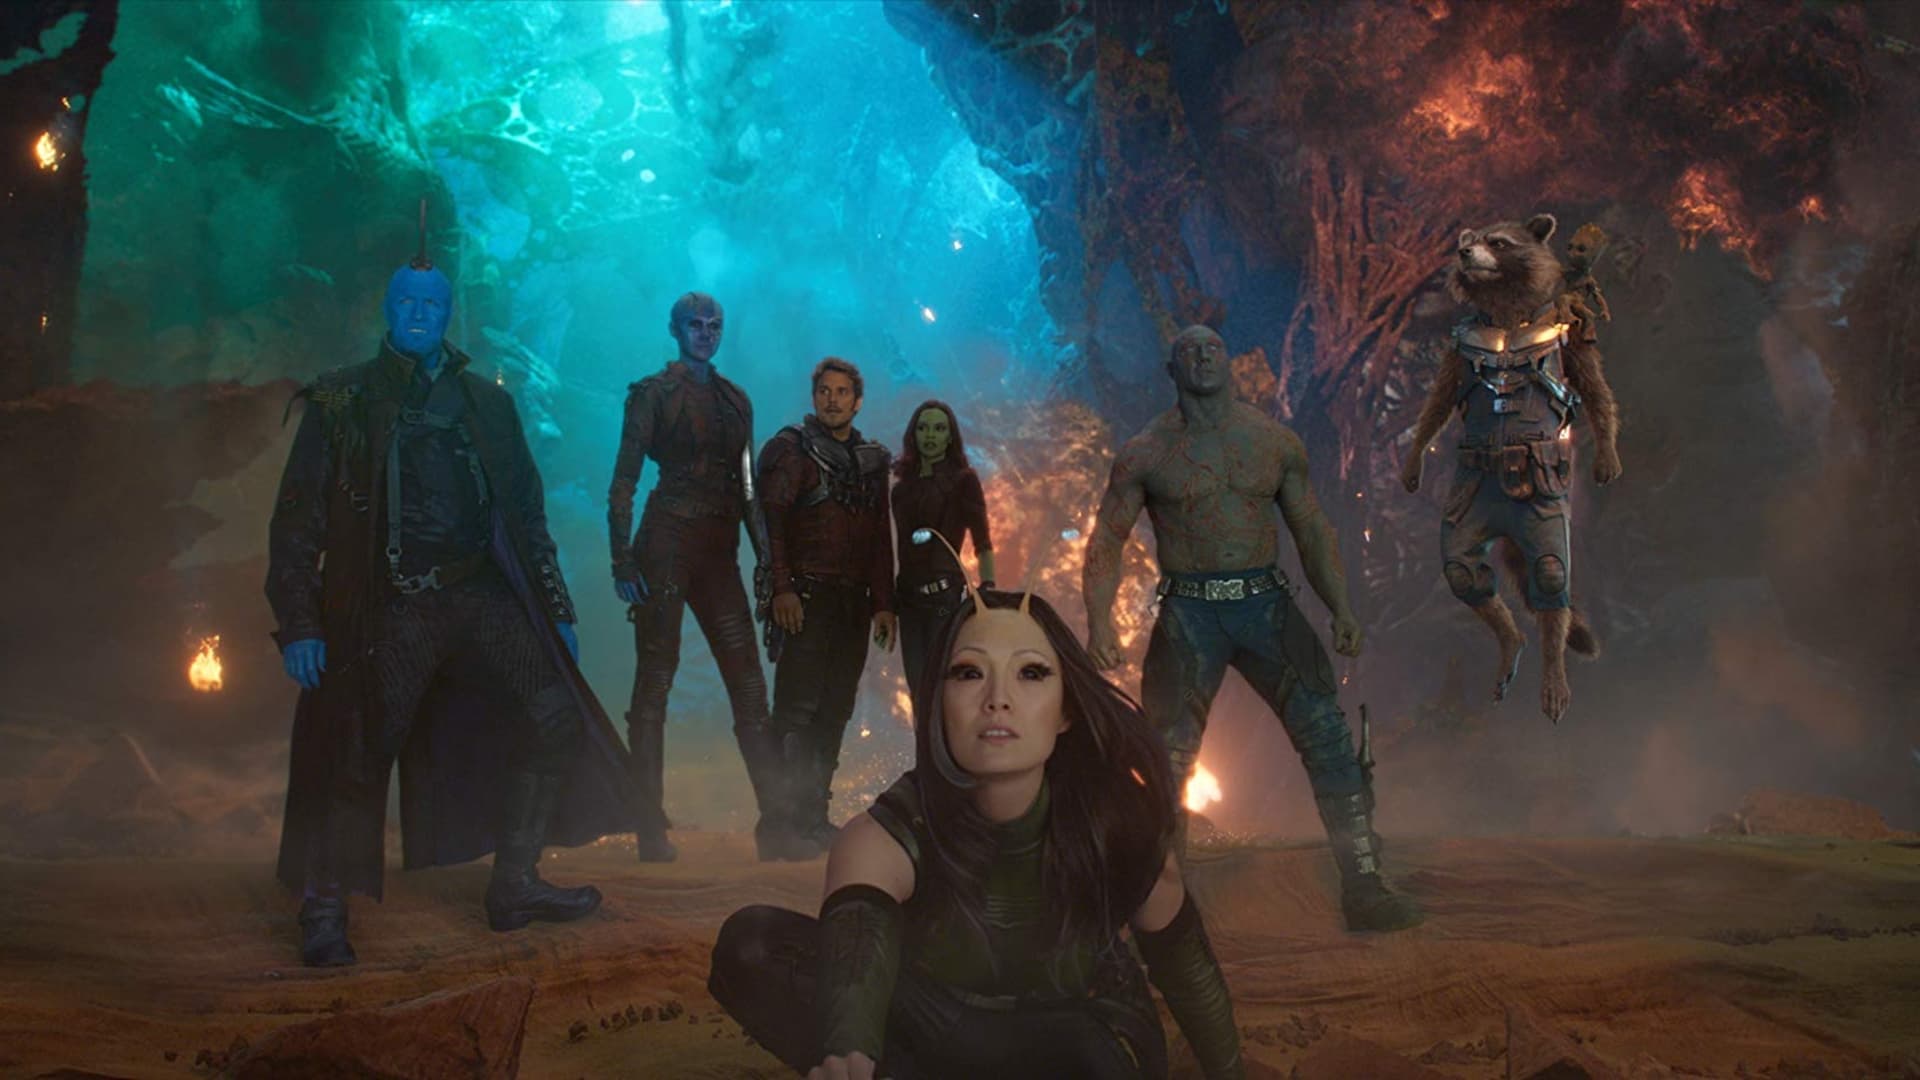 Marvel's Guardians Of The Galaxy Is Now Available For Digital Pre